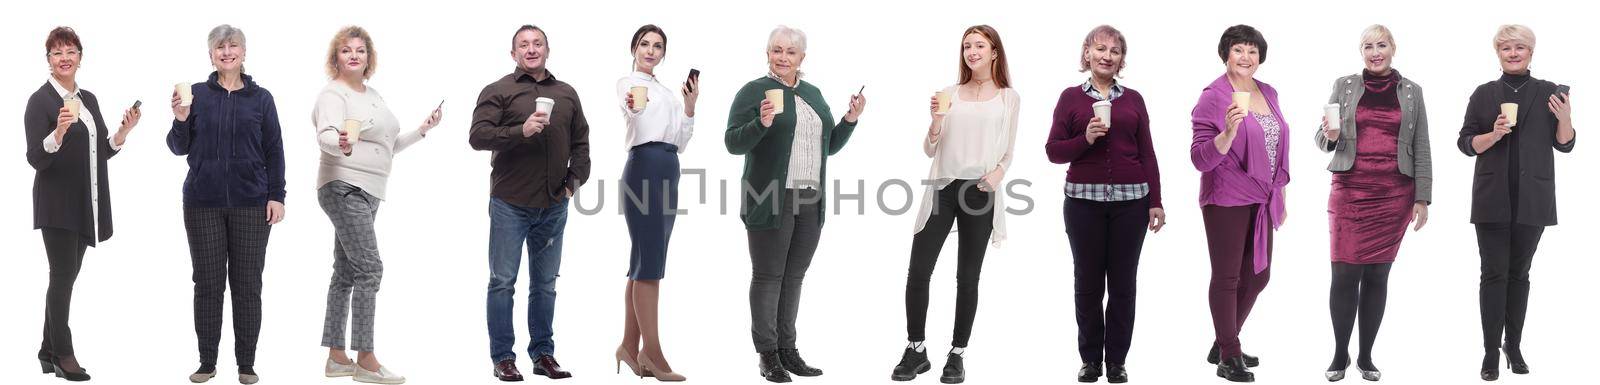 collage people holding coffee in hands isolated on white background